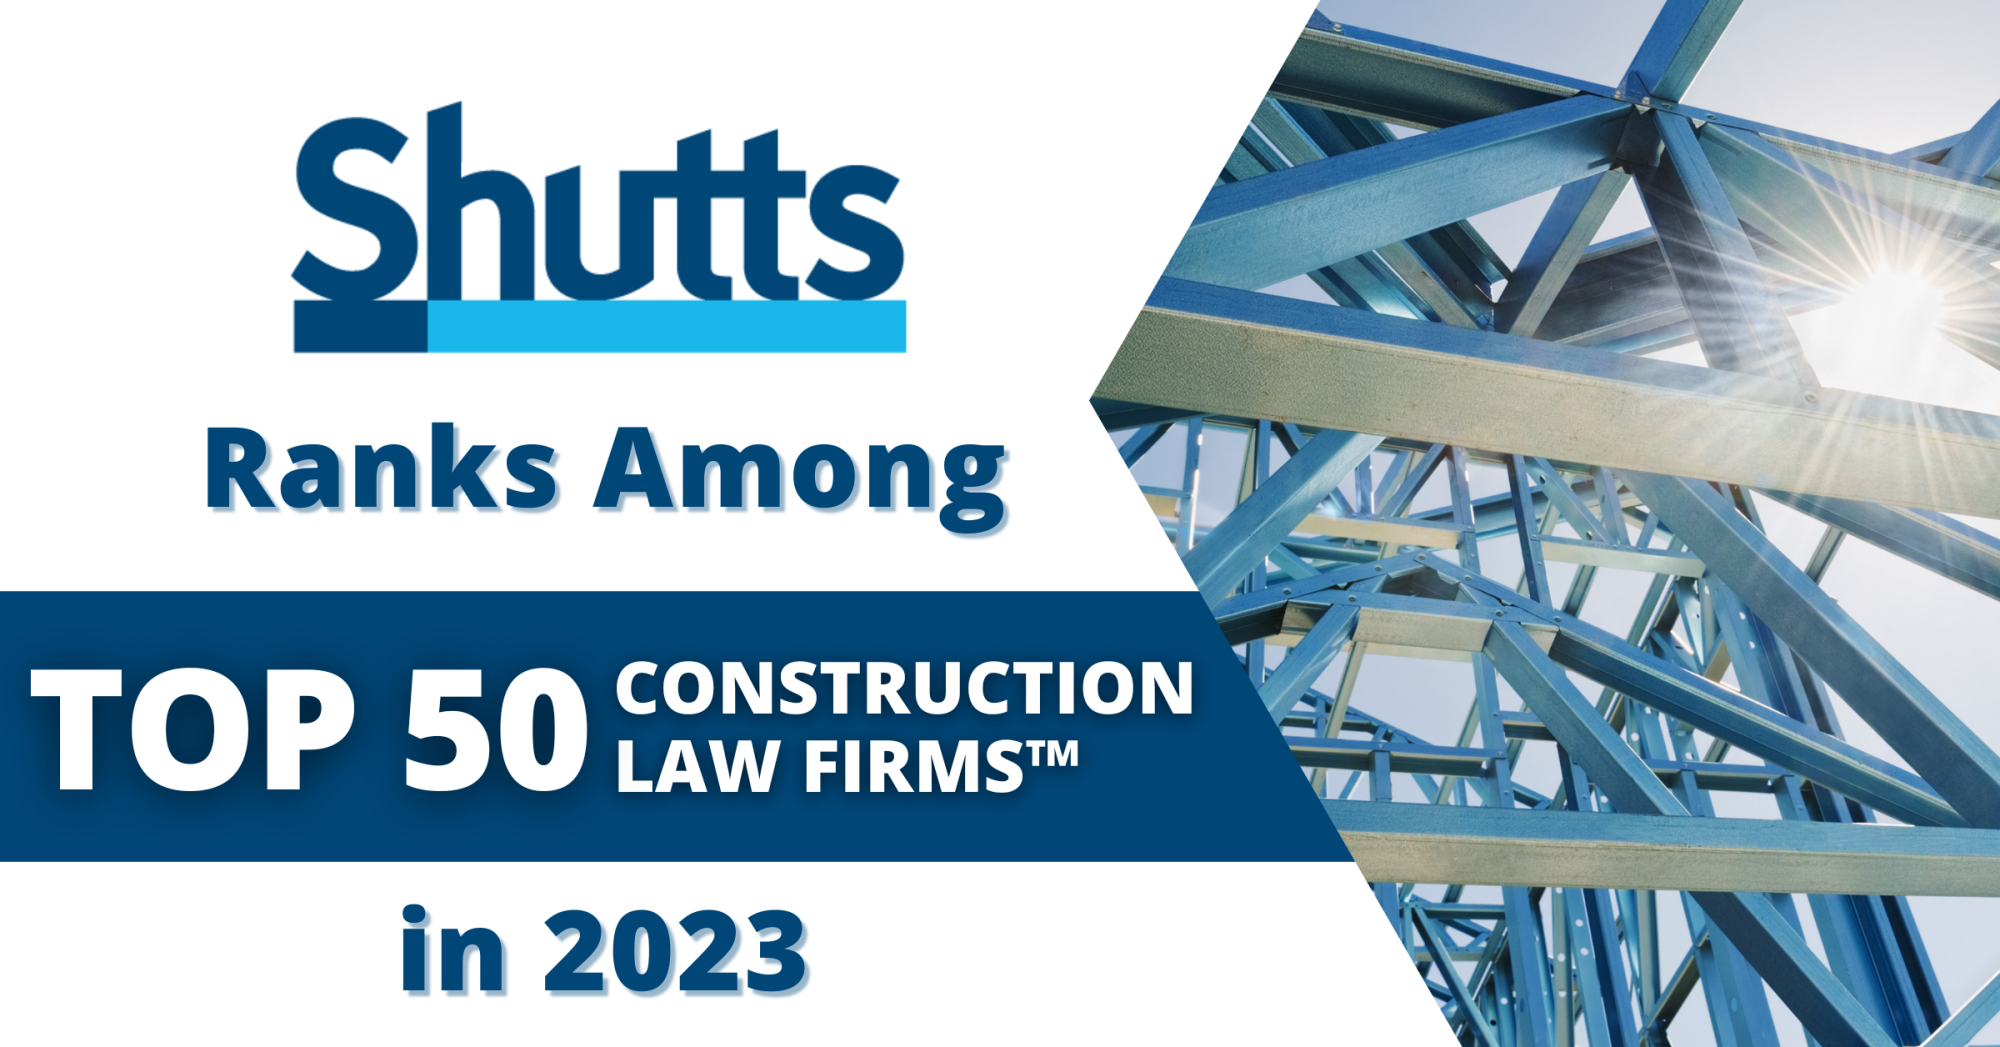 Shutts Ranks Among Top 50 Construction Law Firms in 2023